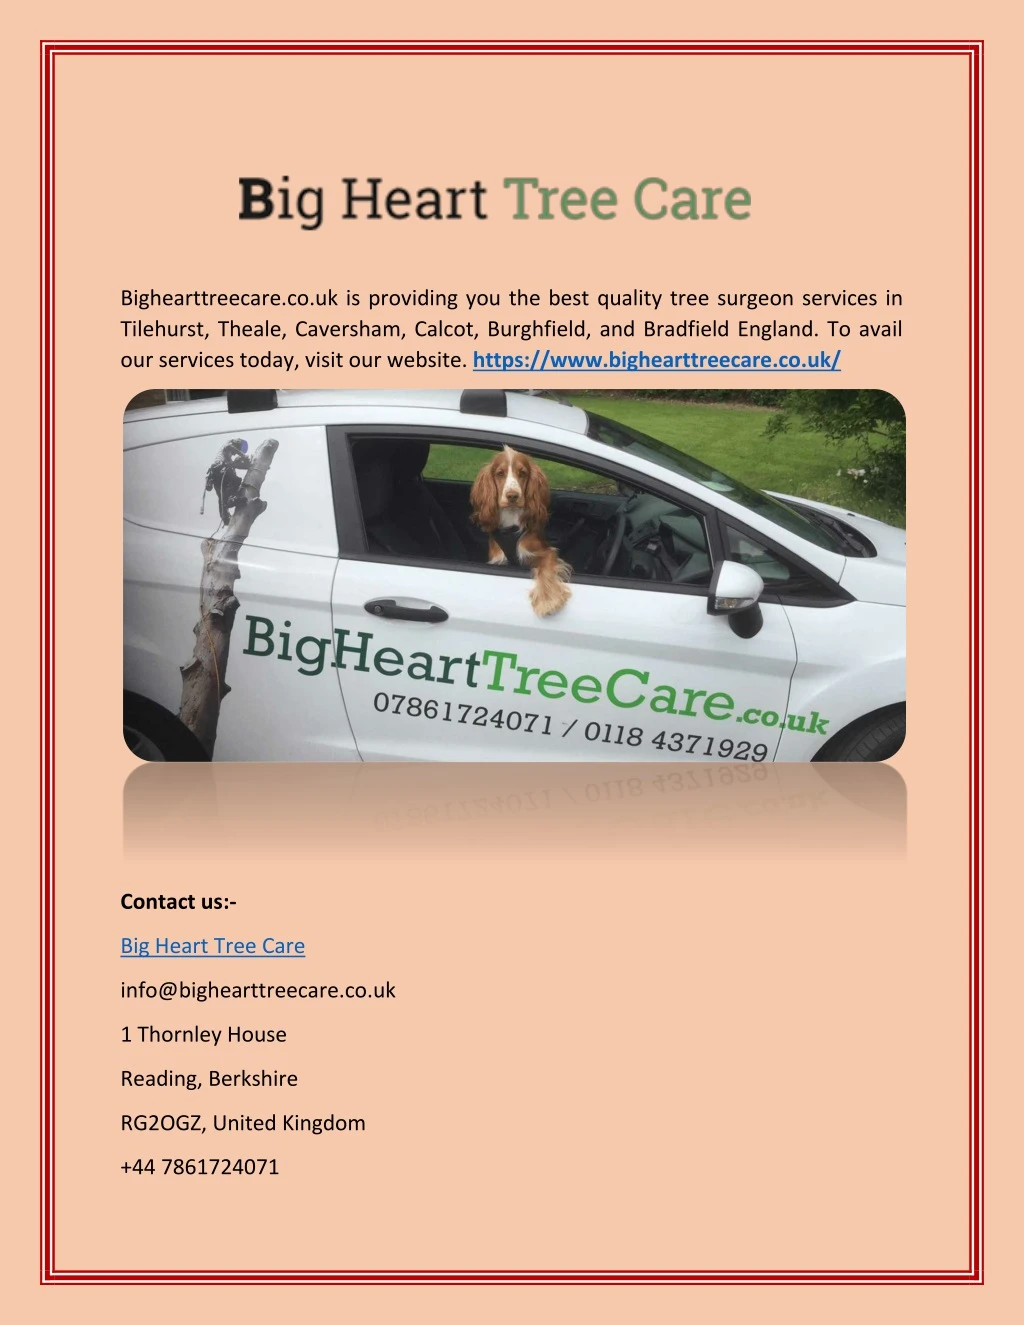 bighearttreecare co uk is providing you the best